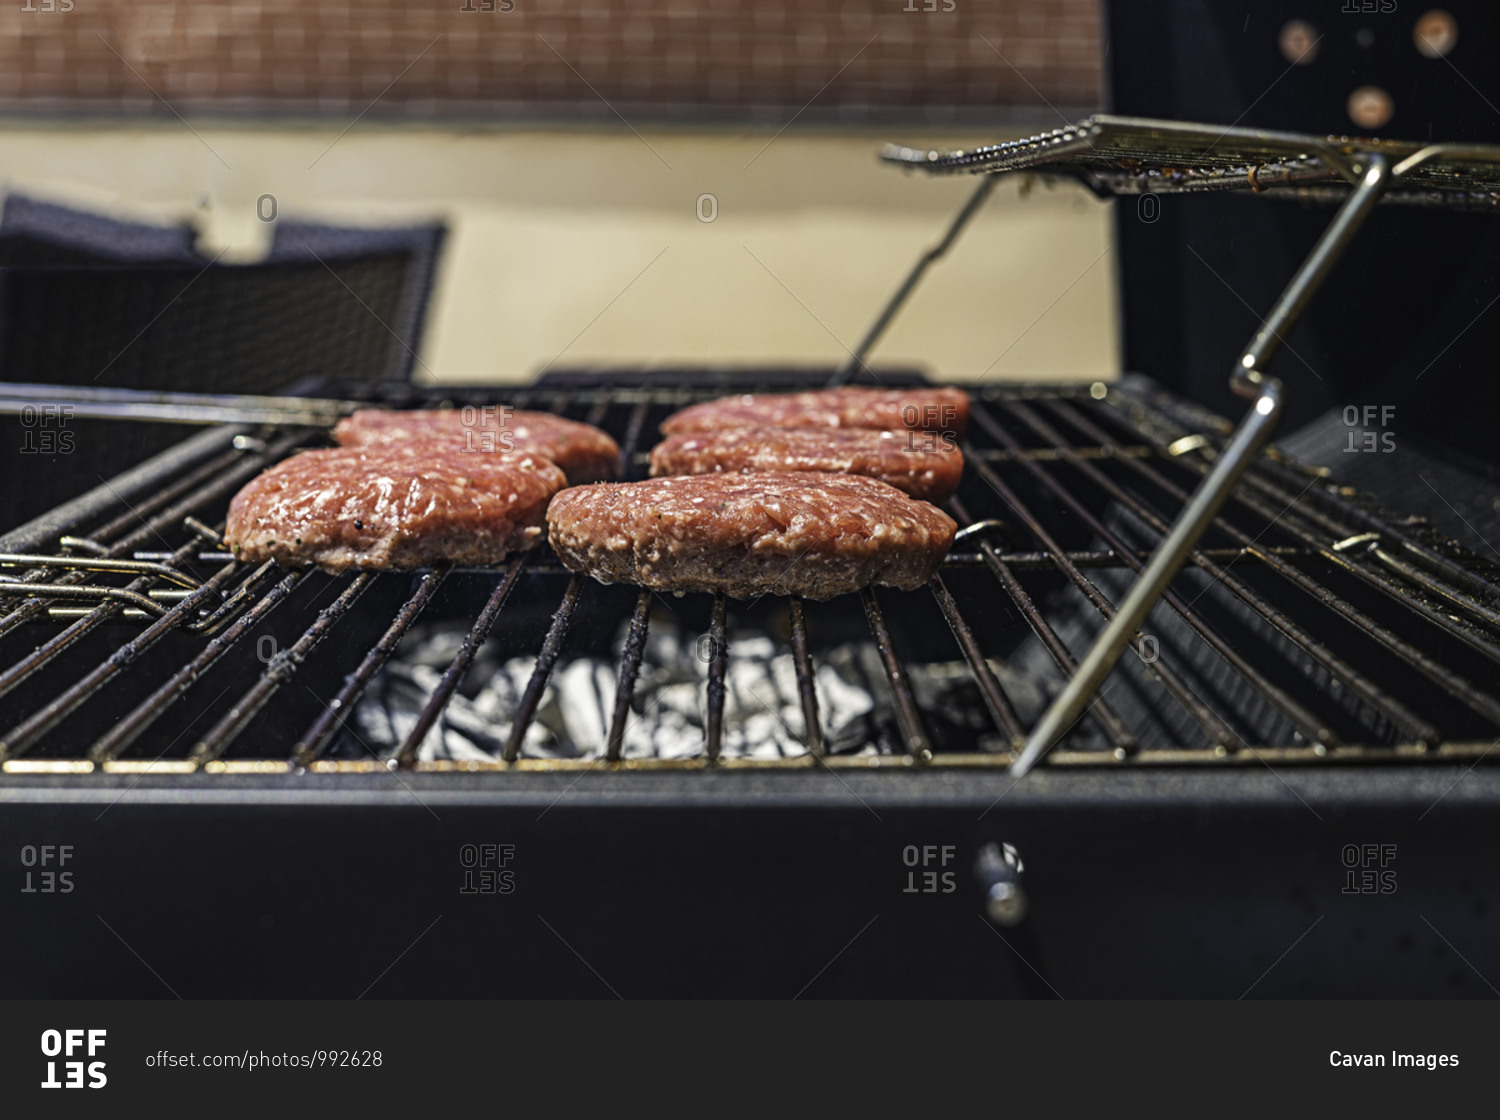 Hamburgers on the barbecue. Close-up view.